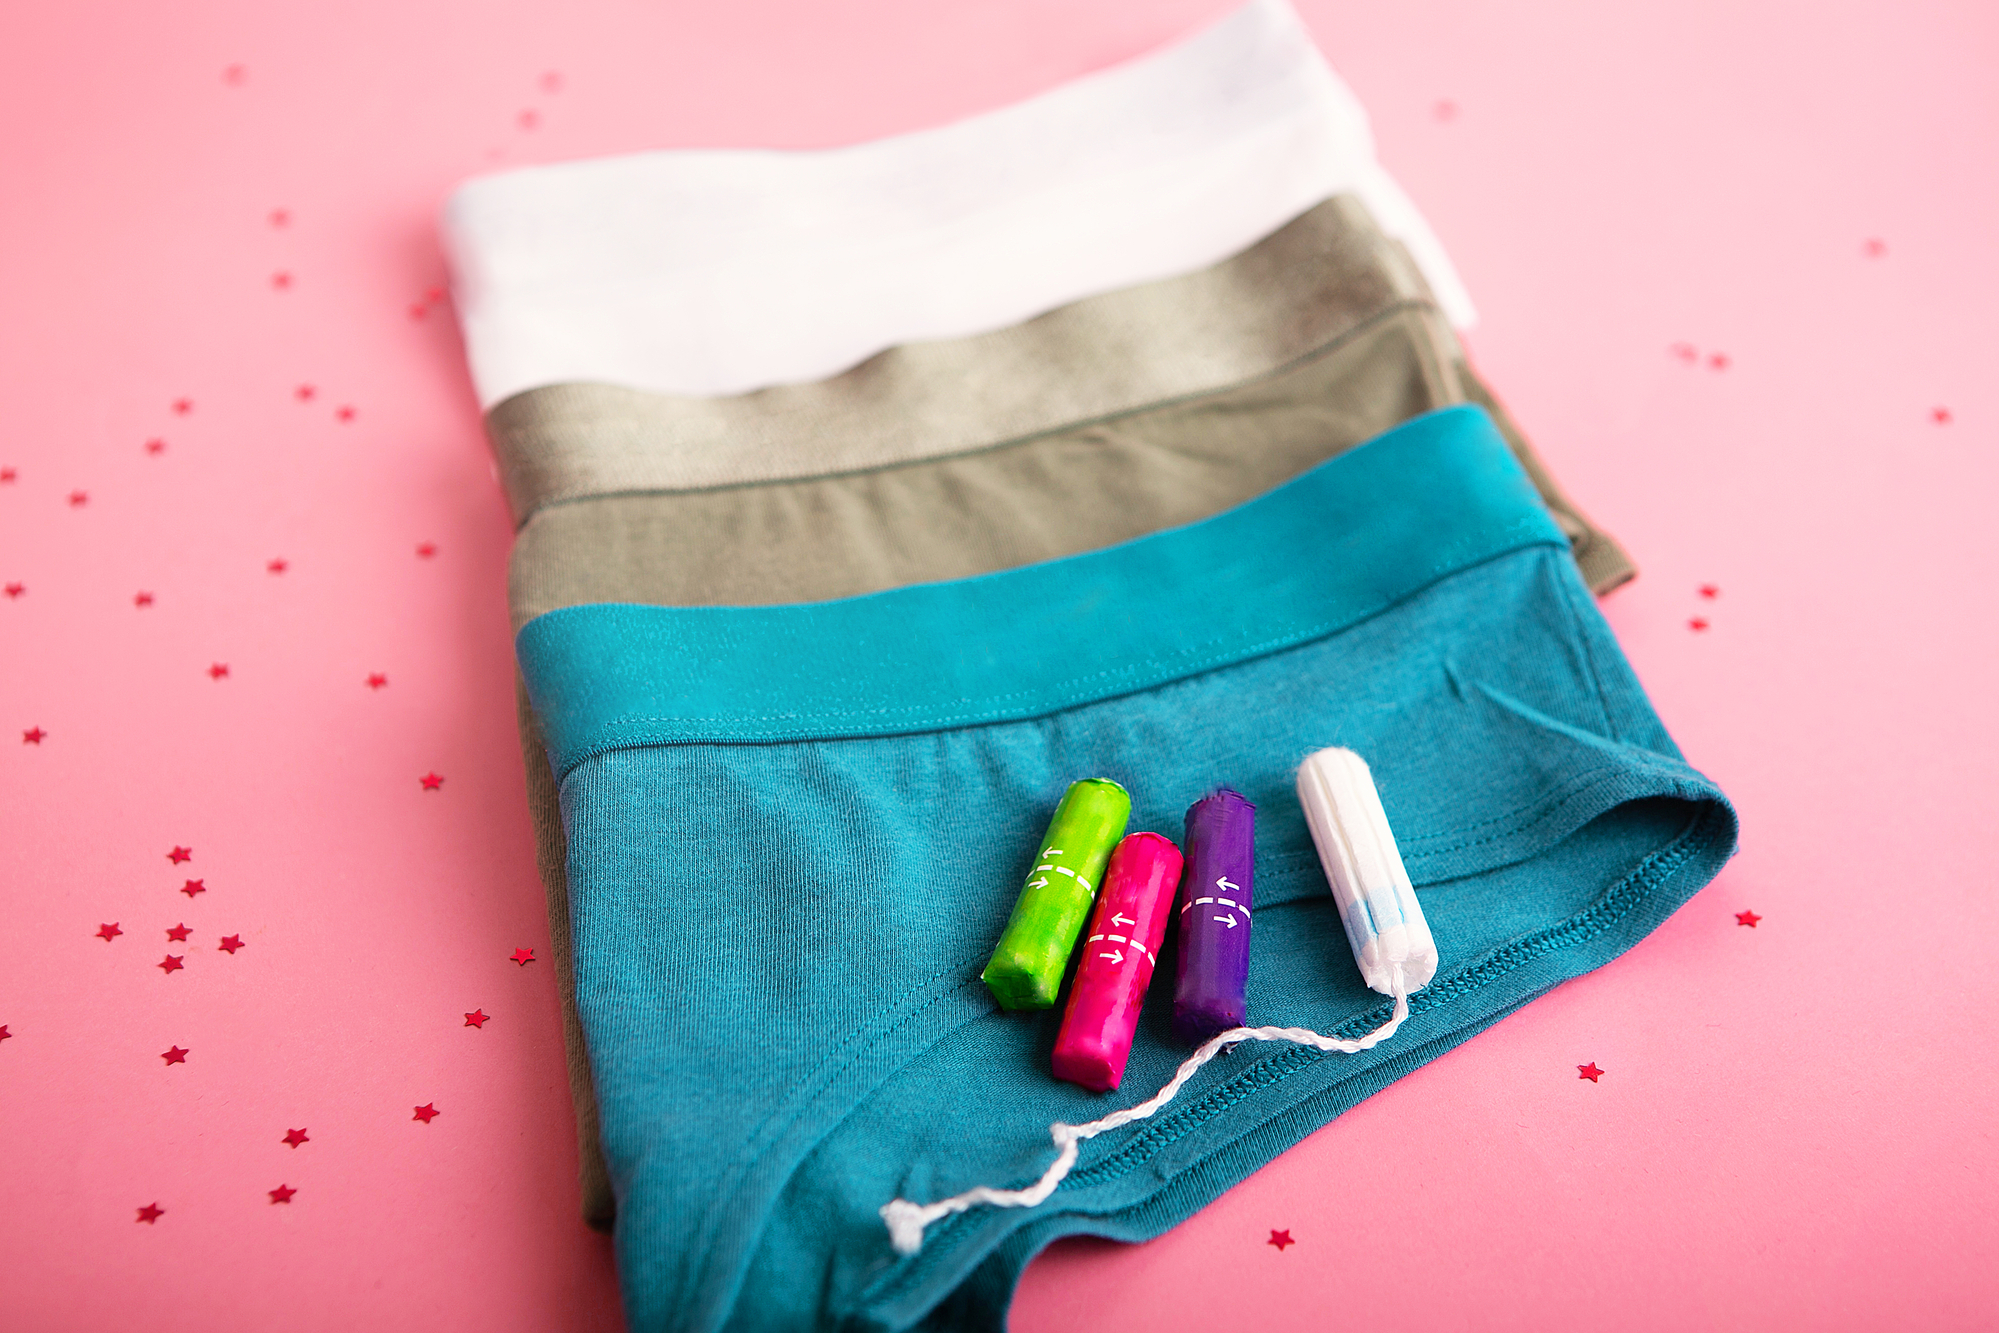 Period underwear may contain troubling chemicals—but the real problem is  much bigger